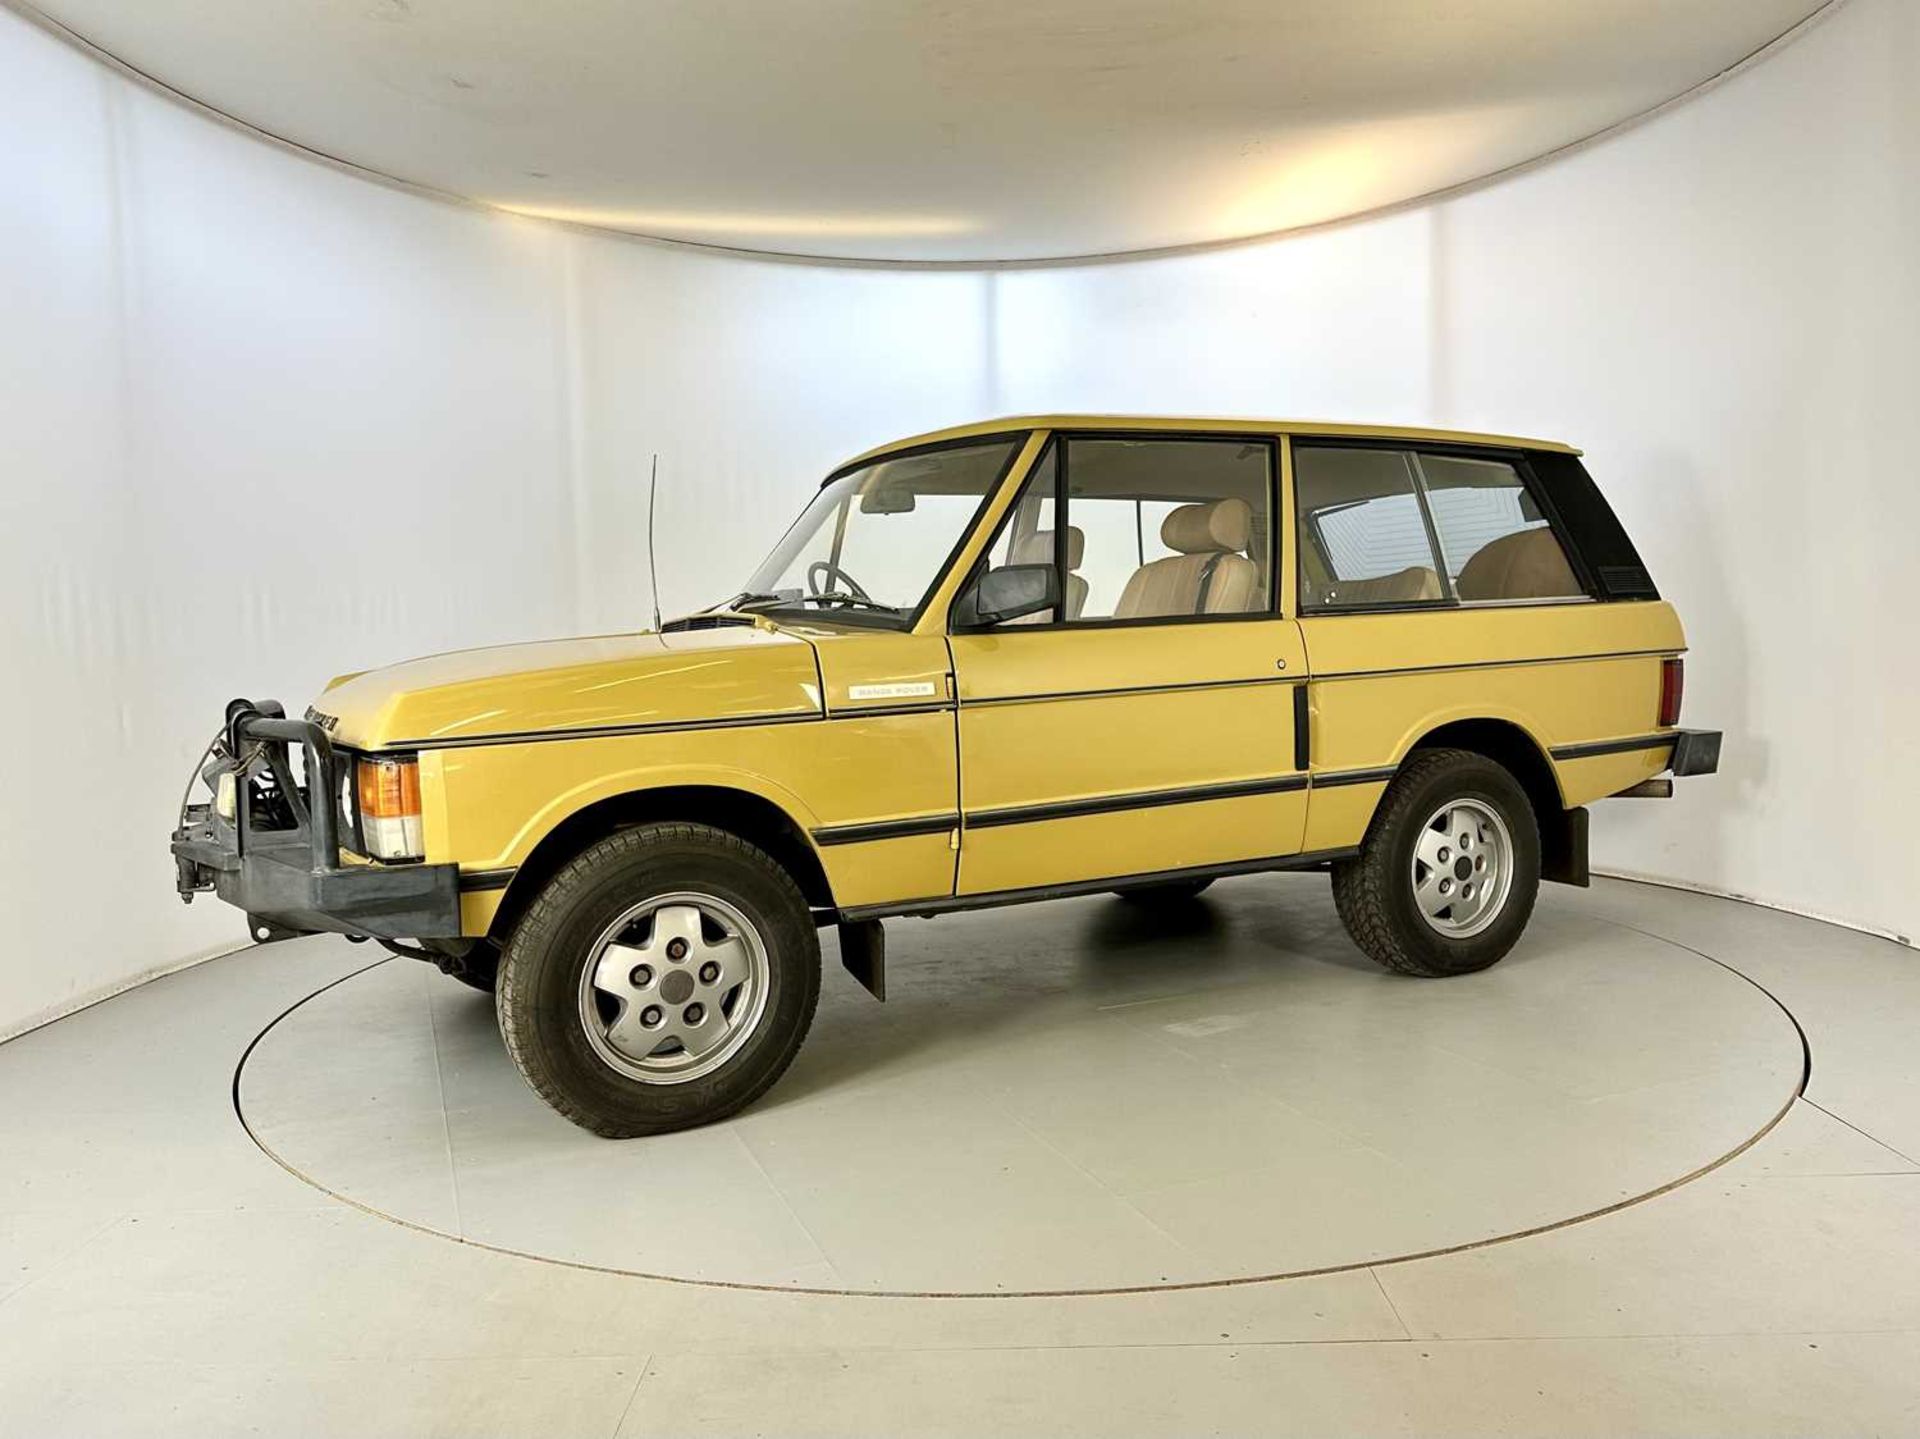 1974 Land Rover Range Rover Showing 26,000 miles from new - Image 4 of 29